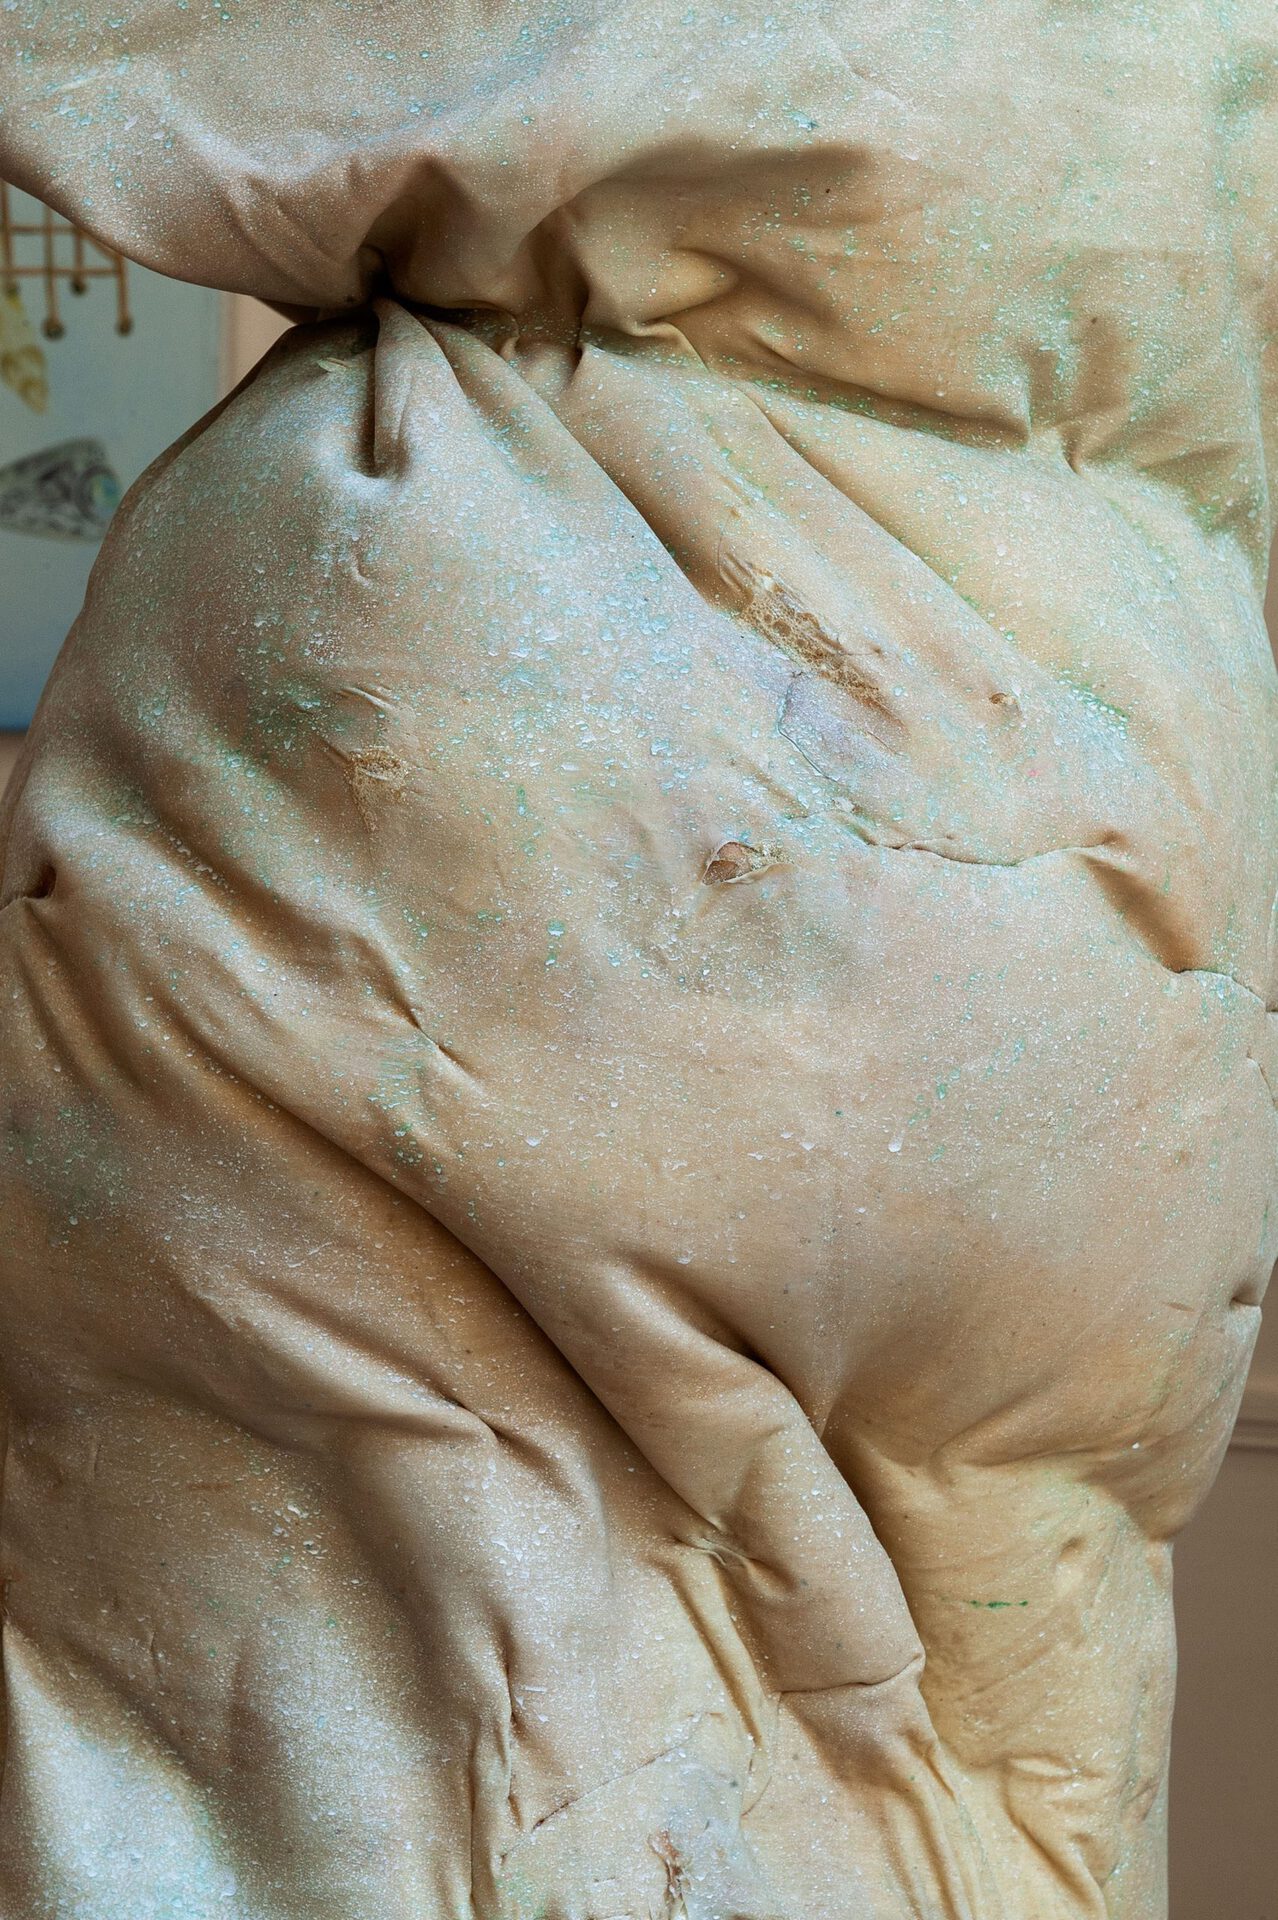 Sophie Varin, "The Intruders": Wounded baker, 2019, latex, expandable foam, pigments